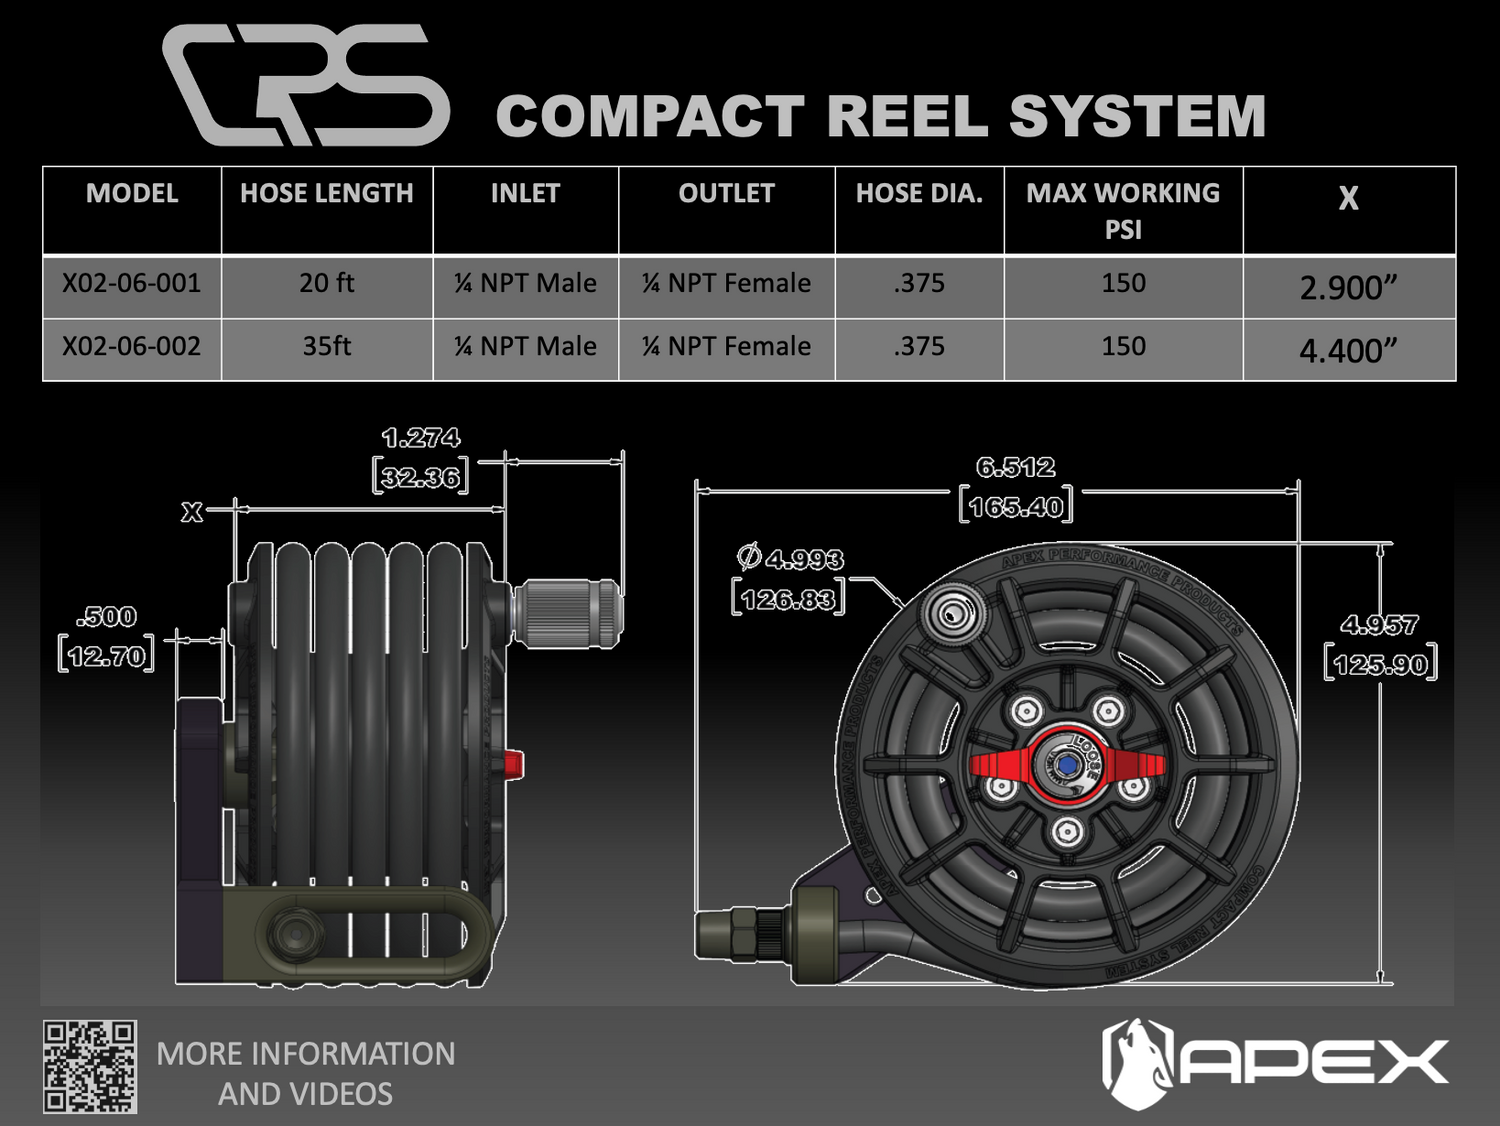 The 35' Compact Reel System is IN STOCK!!! PATENT PENDING